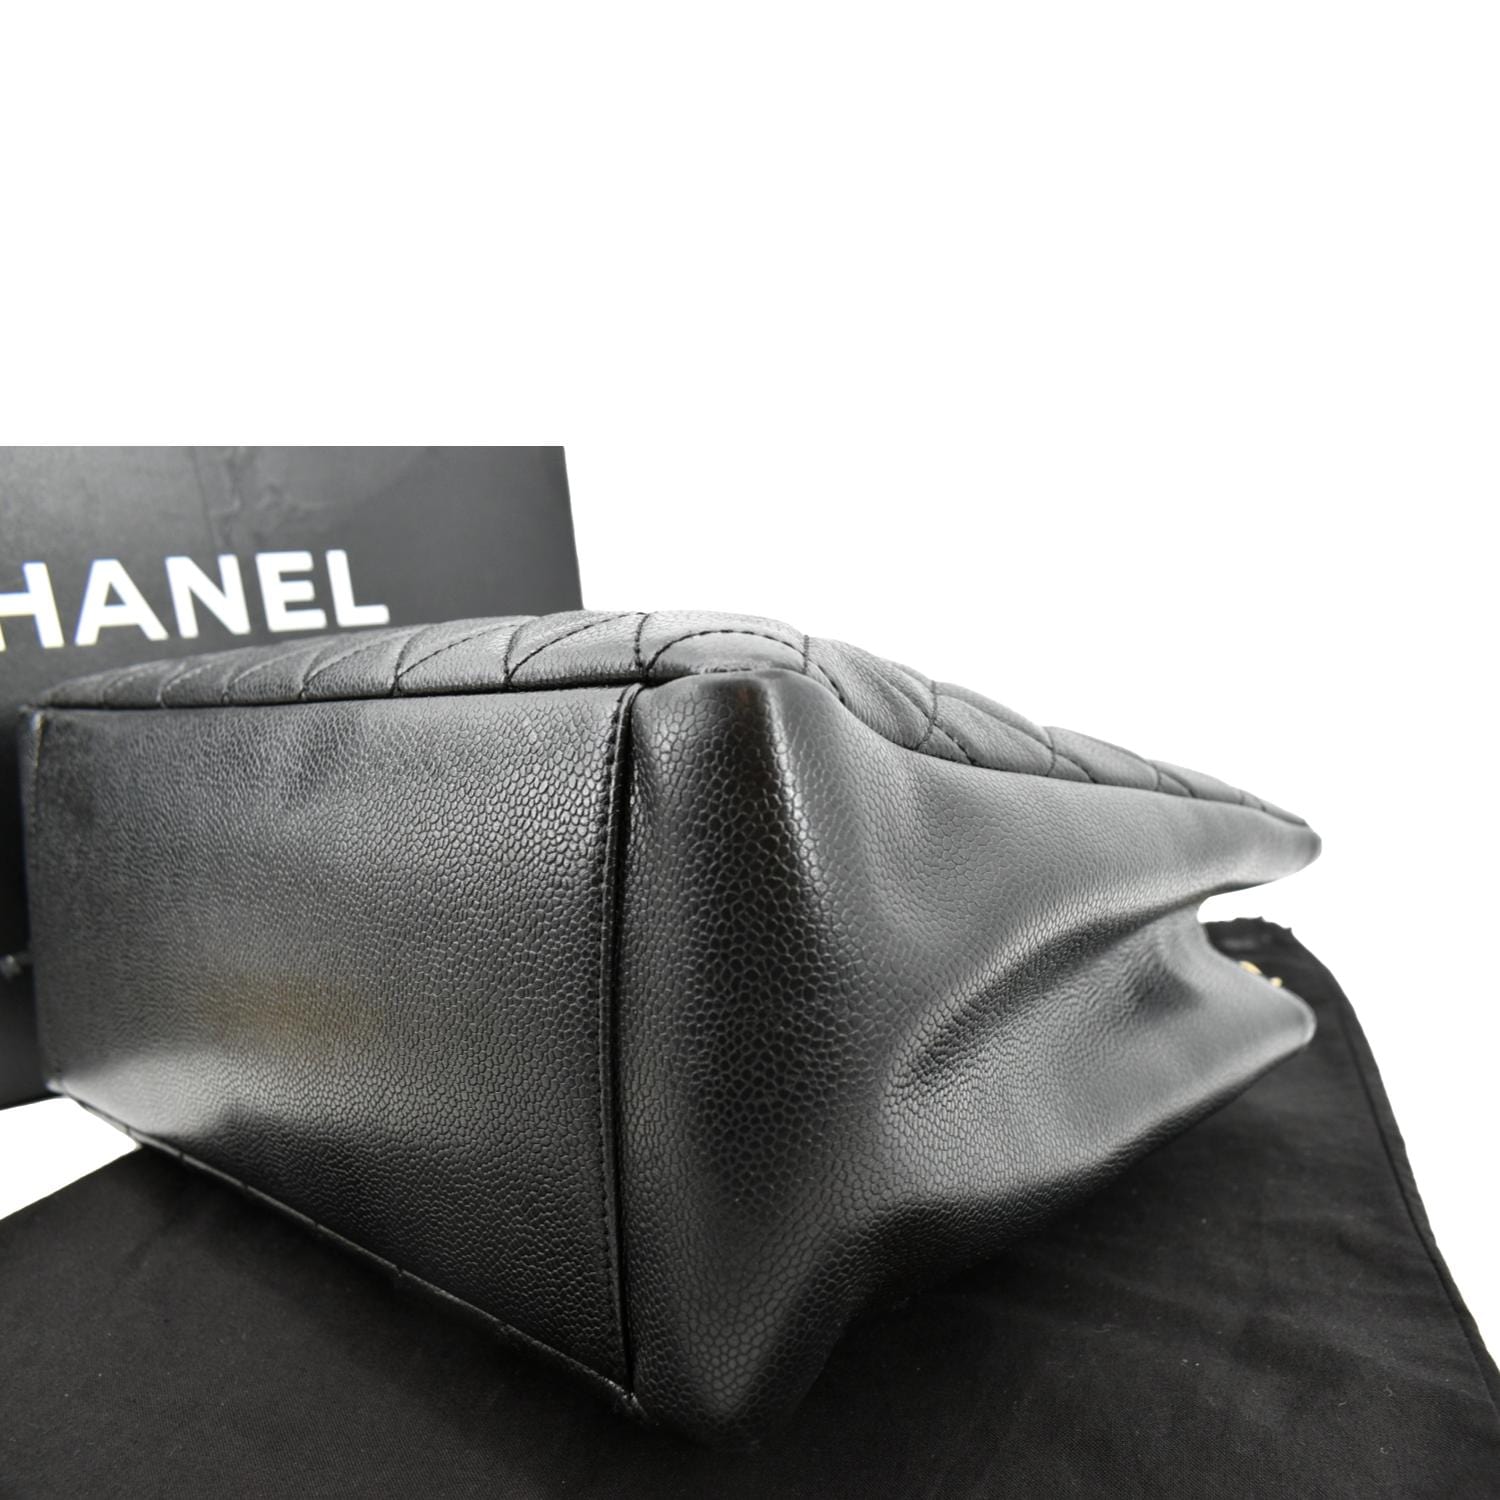 CHANEL Grand Shopping Caviar Leather GST Tote Bag Black - Sold